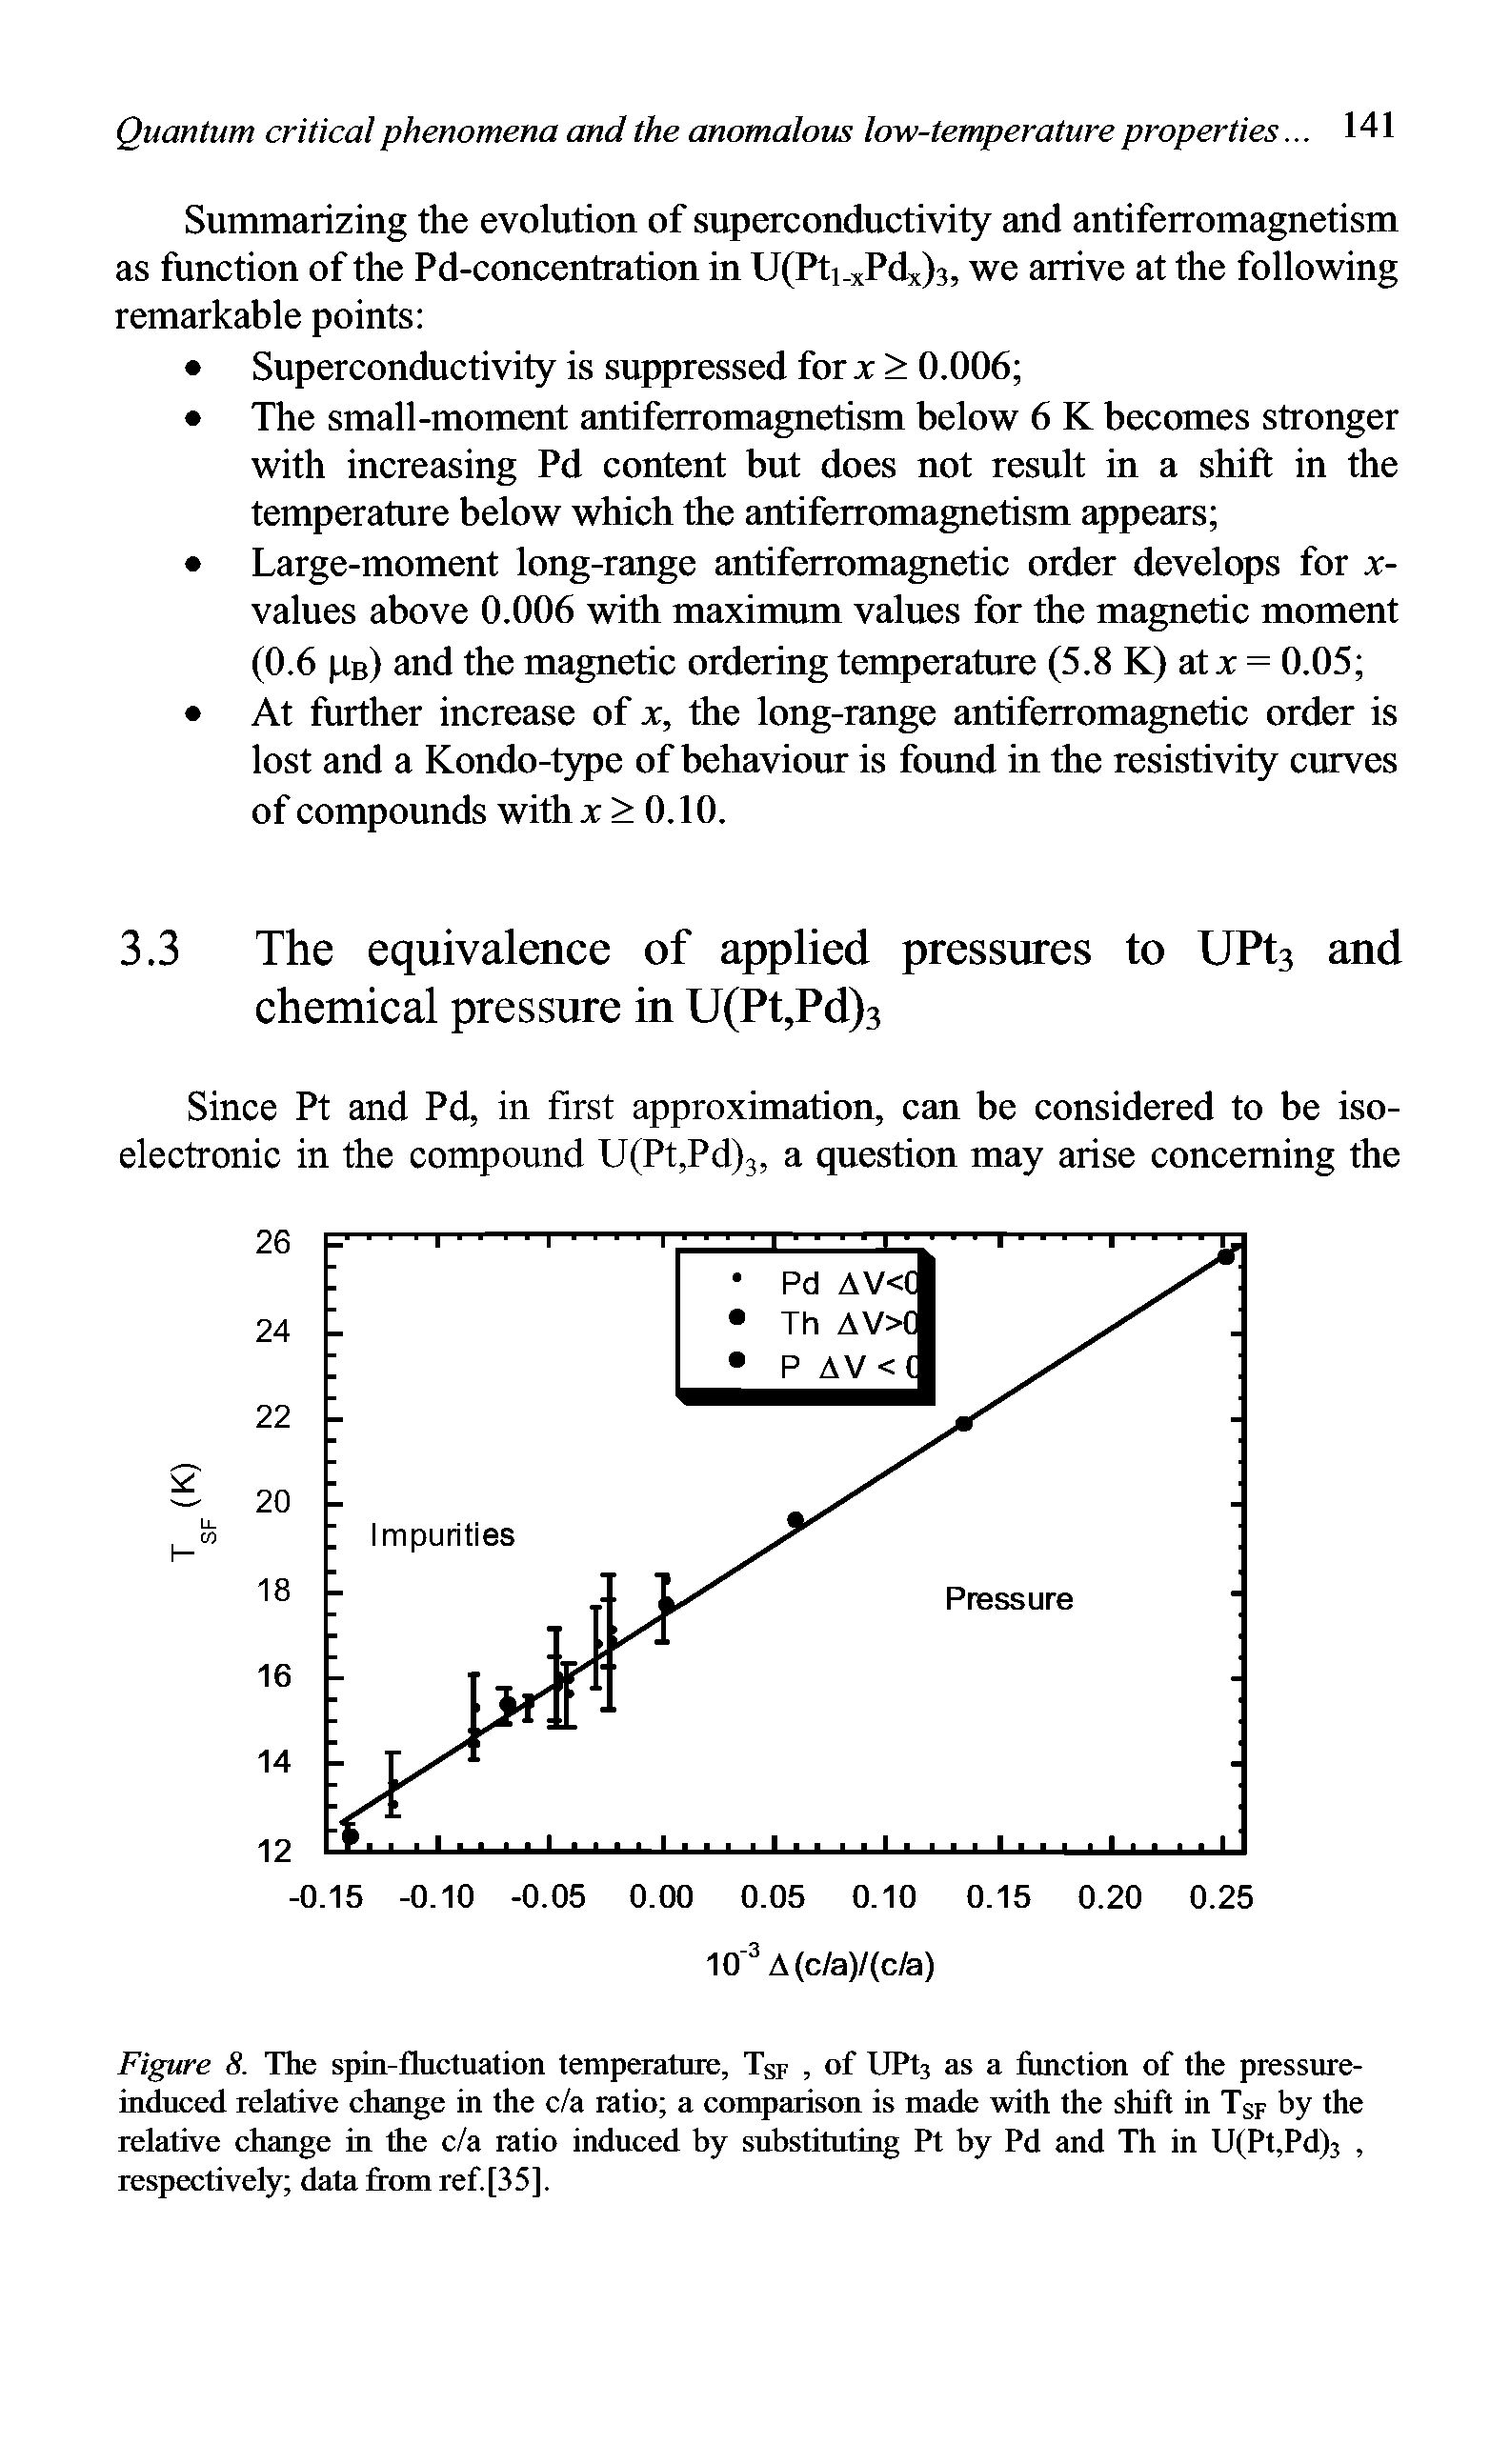 Figure 8. The spin-fluctuation temperature, Tsf, of UPt3 as a function of the pressure-induced relative change in the c/a ratio a comparison is made with the shift in Tsf by the relative change in the c/a ratio induced by substituting Pt by Pd and Th in U( Pt,Pd)3, respectively data from ref.[35].